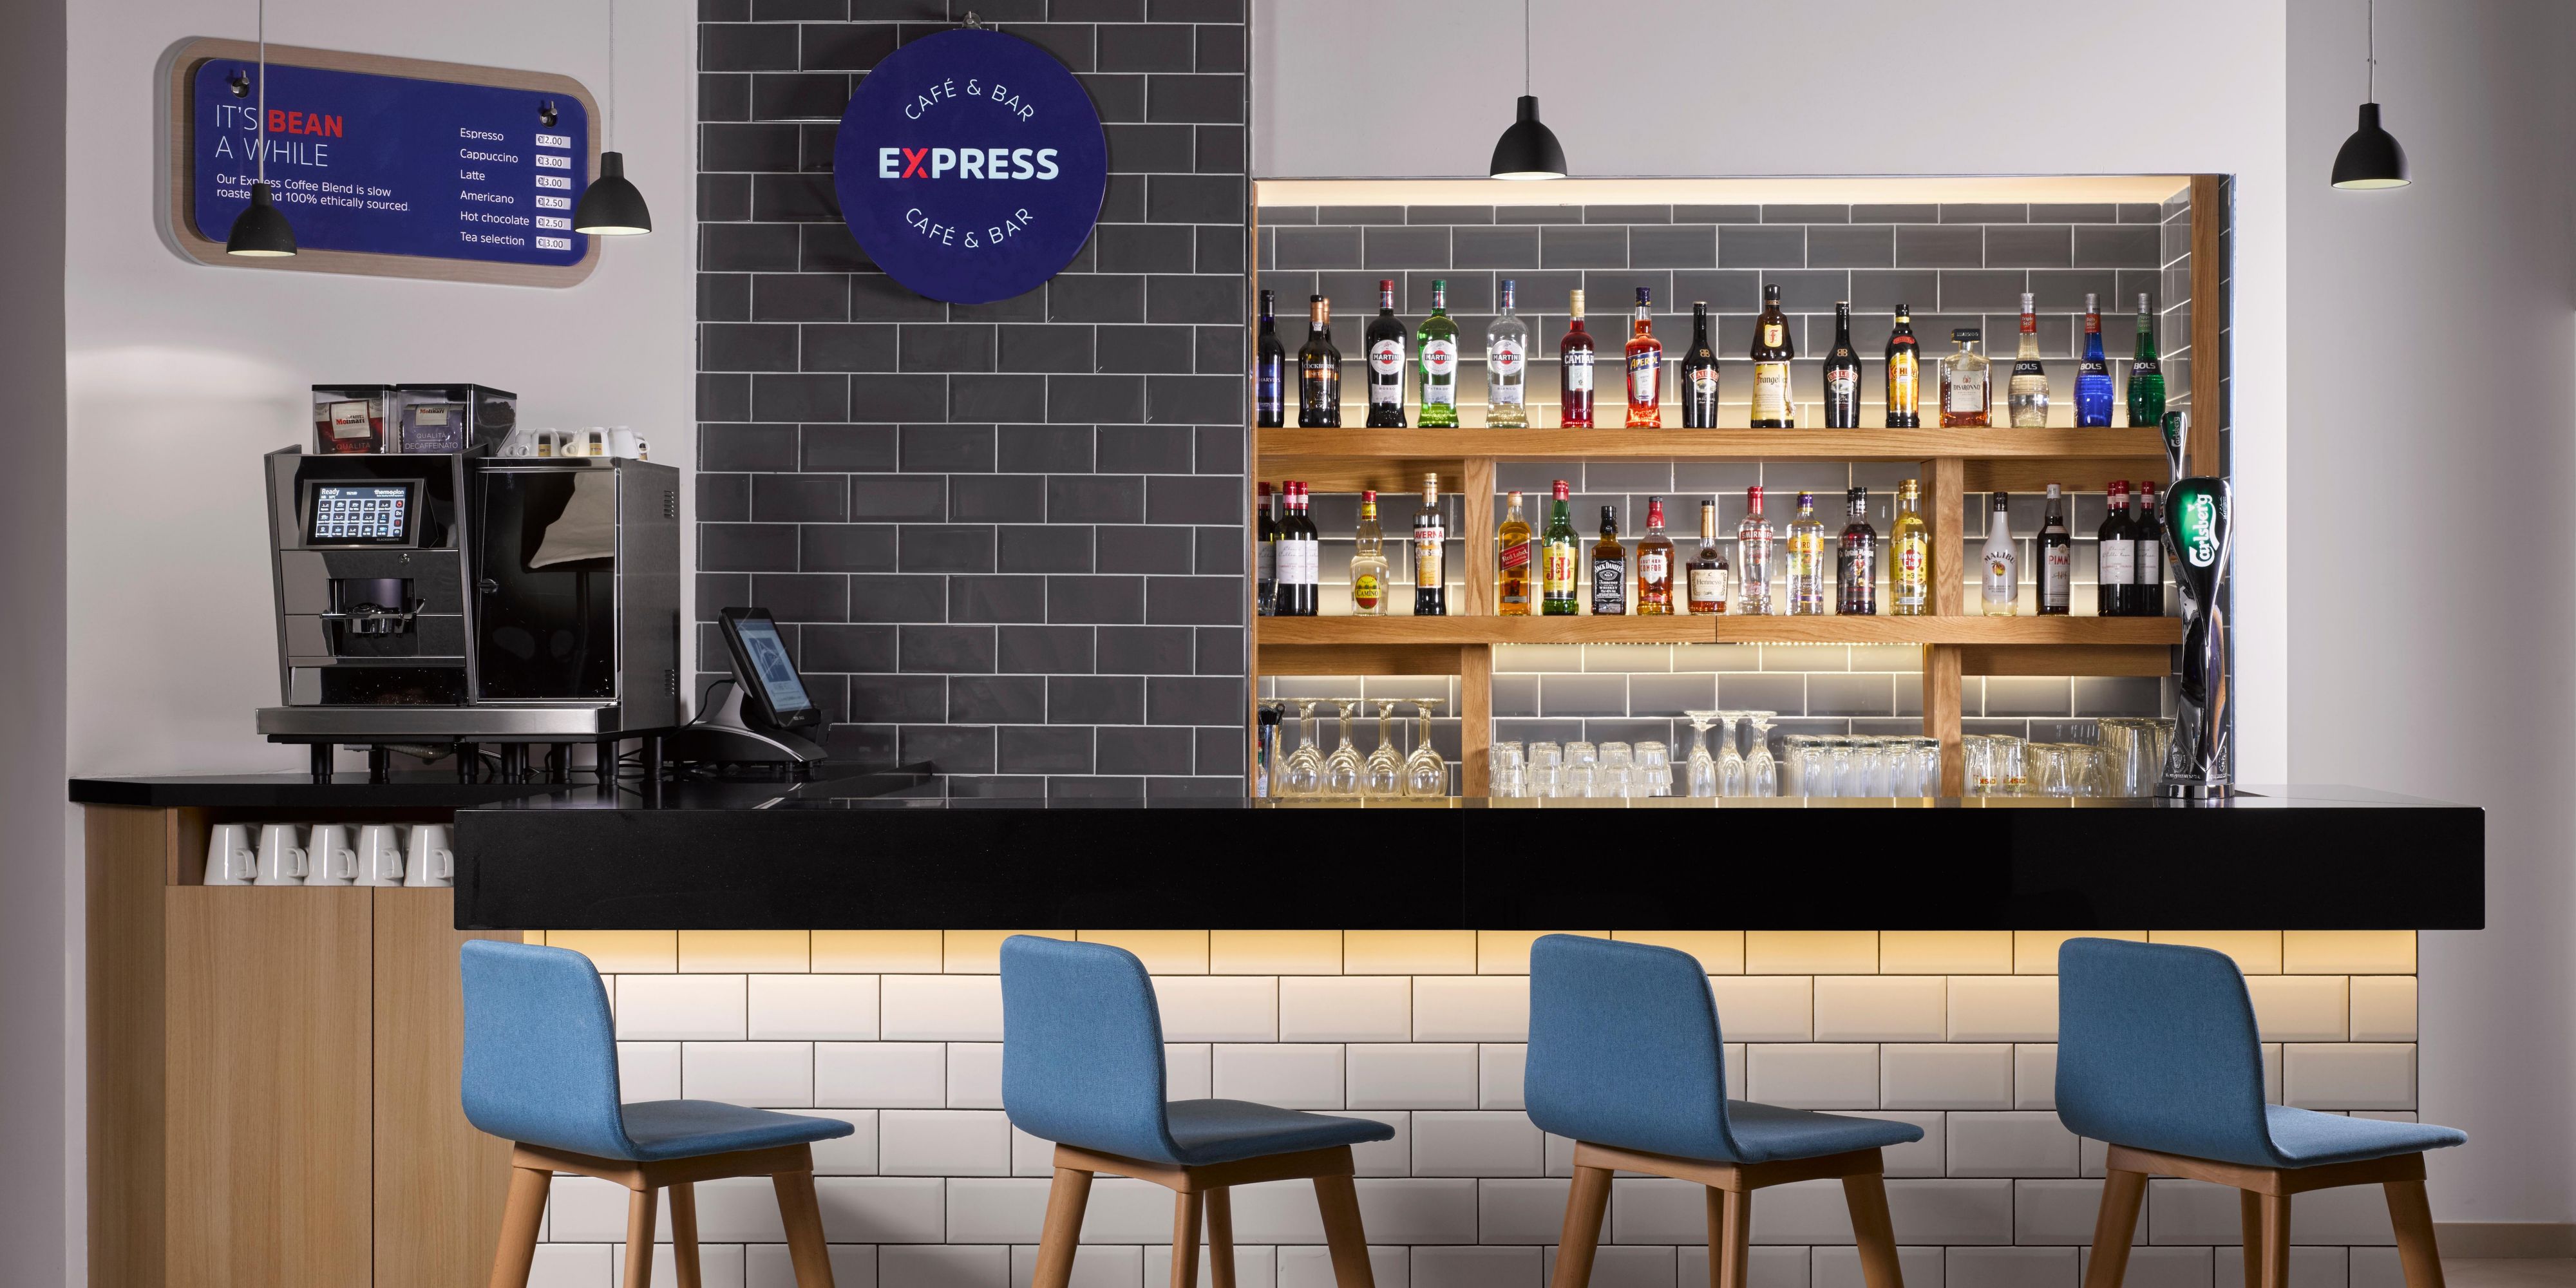 Indulge in a delightful array of drinks at our stylish hotel bar, the Express Café & Bar. From refreshing cocktails to fine wines, there's something for everyone to enjoy. Join us for a relaxing evening of drinks and good company. We look forward to welcoming you to our vibrant bar.